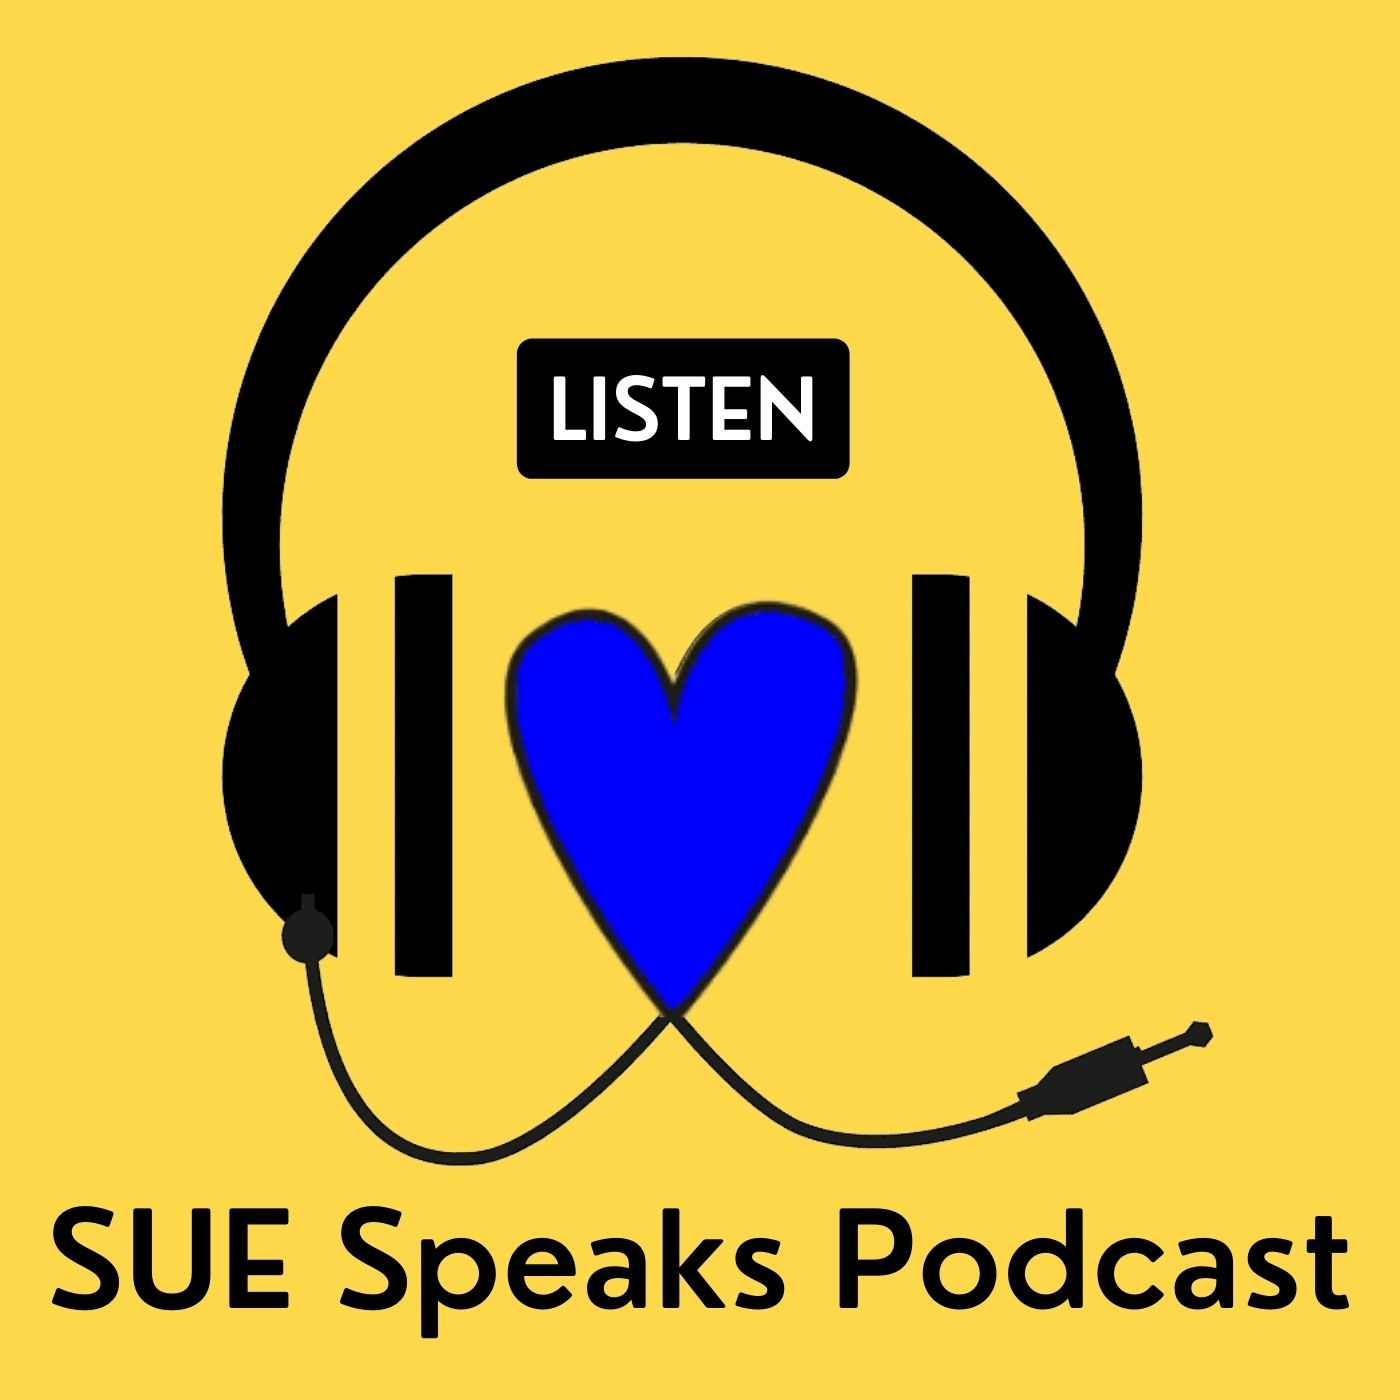 SUE Speaks Podcast: Searching for Unity in Everything